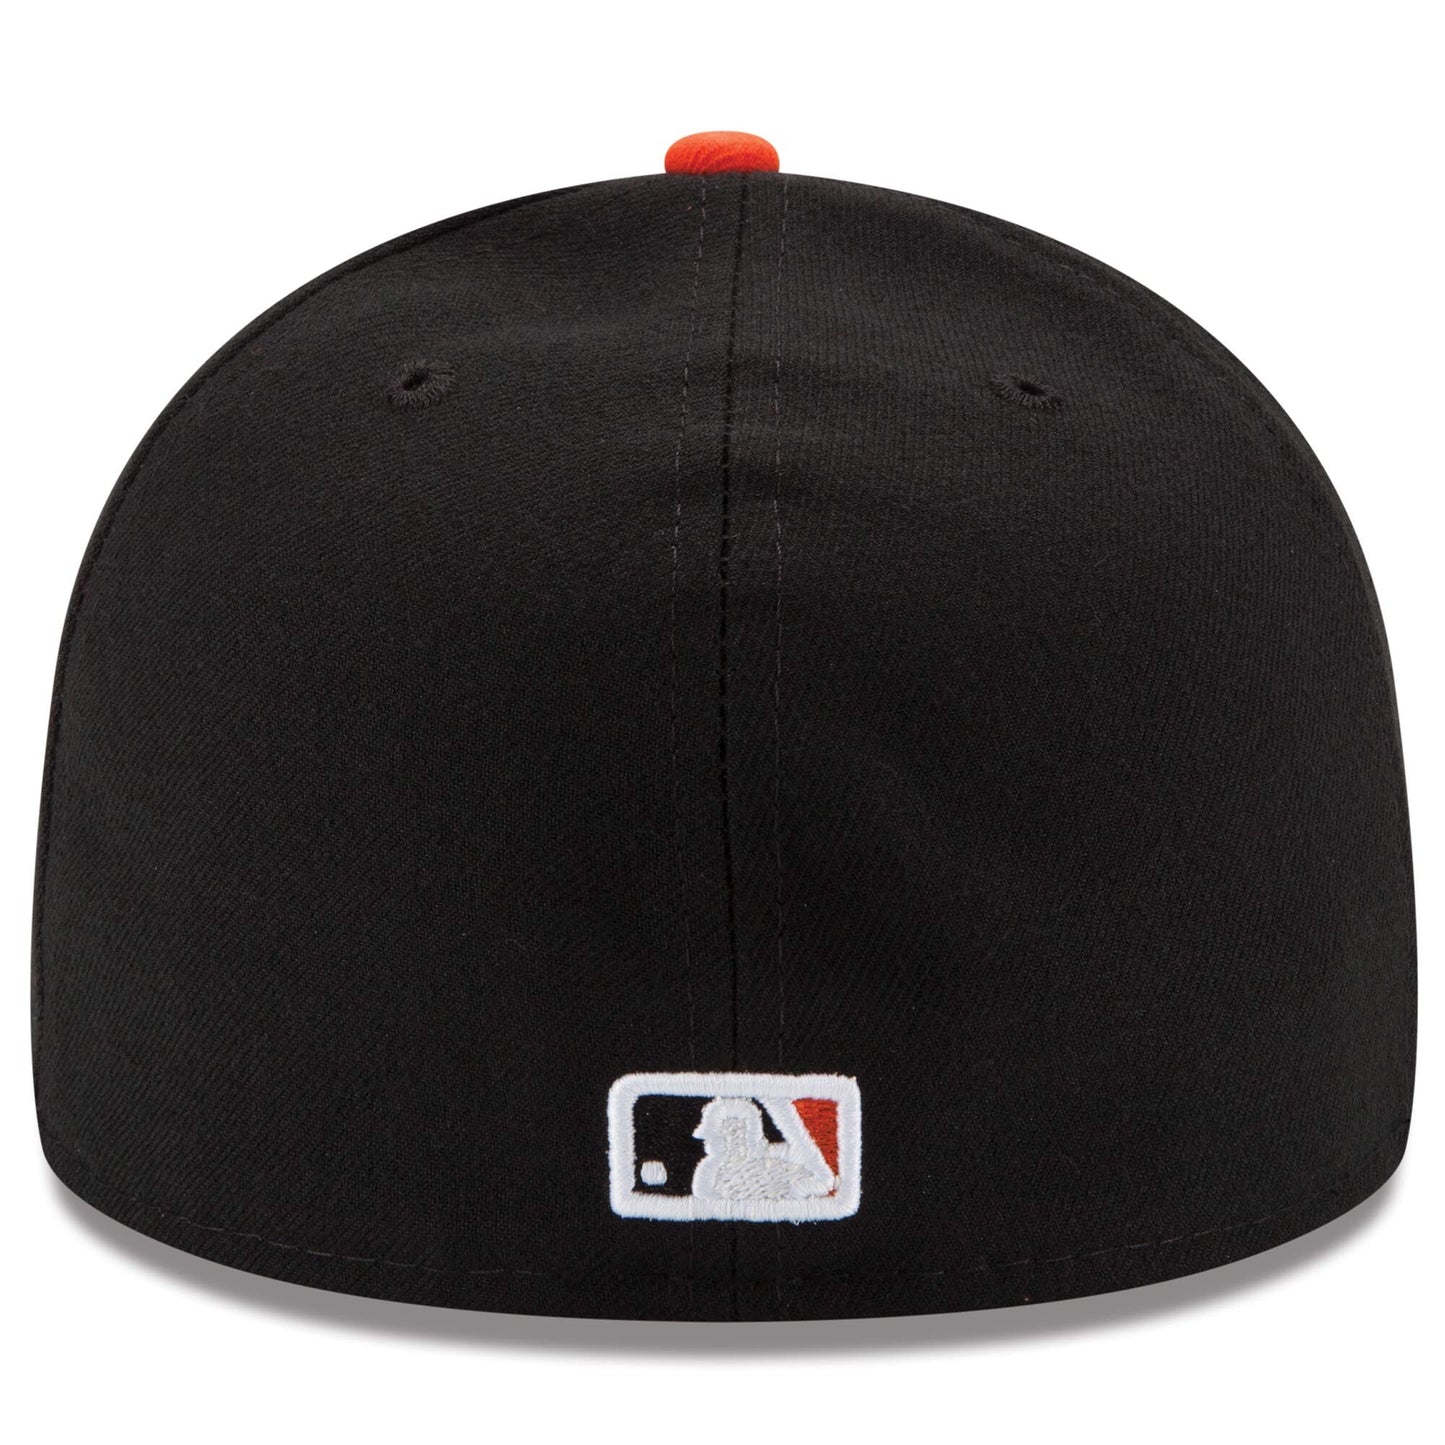 Men's San Francisco Giants New Era Black/Orange Alternate Game Authentic Collection On-Field 59FIFTY Fitted Hat